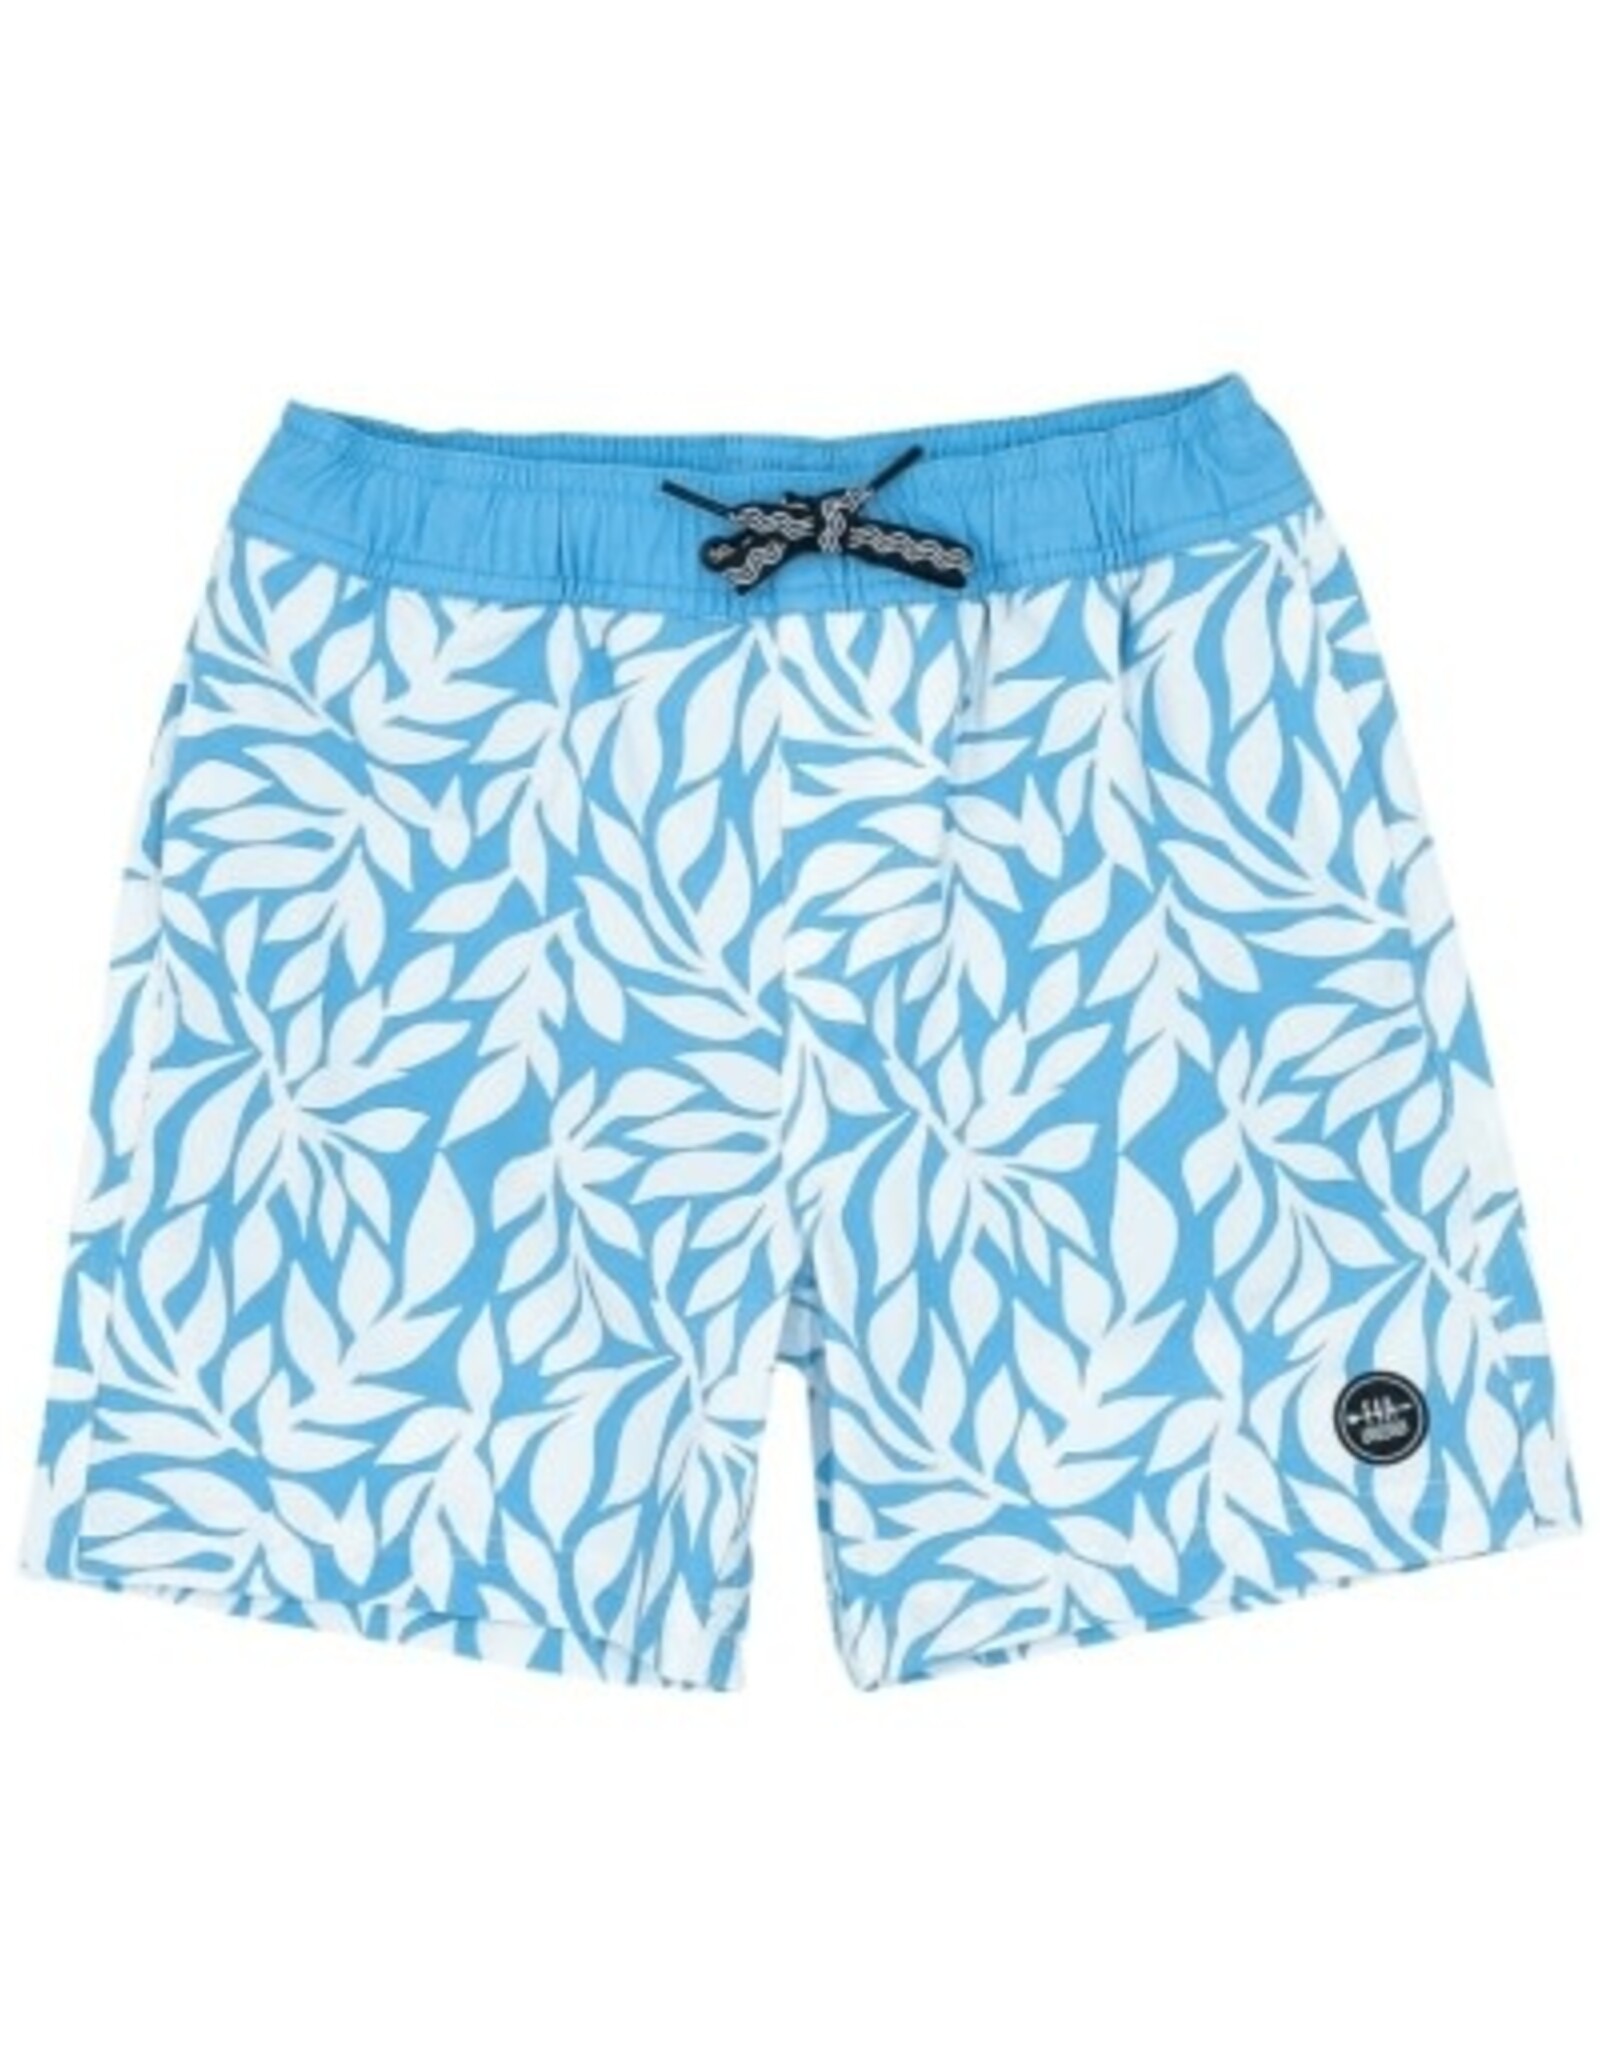 Feather 4 Arrow HIGH TIDE VOLLEY TRUNK